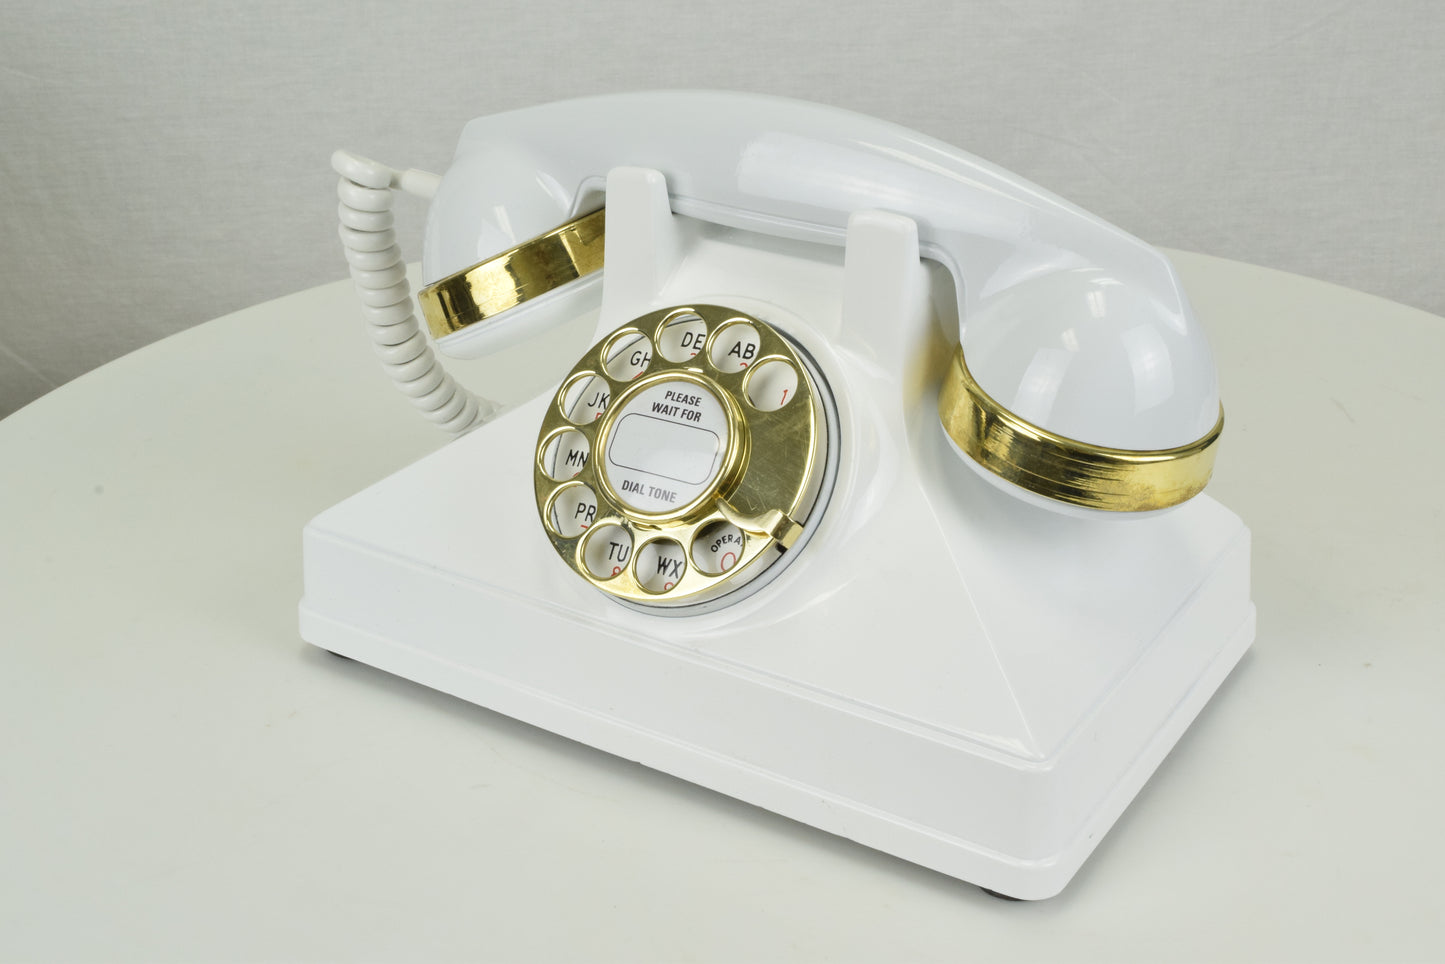 Northern Electric No. 1 Uniphone - White with Brass Trim